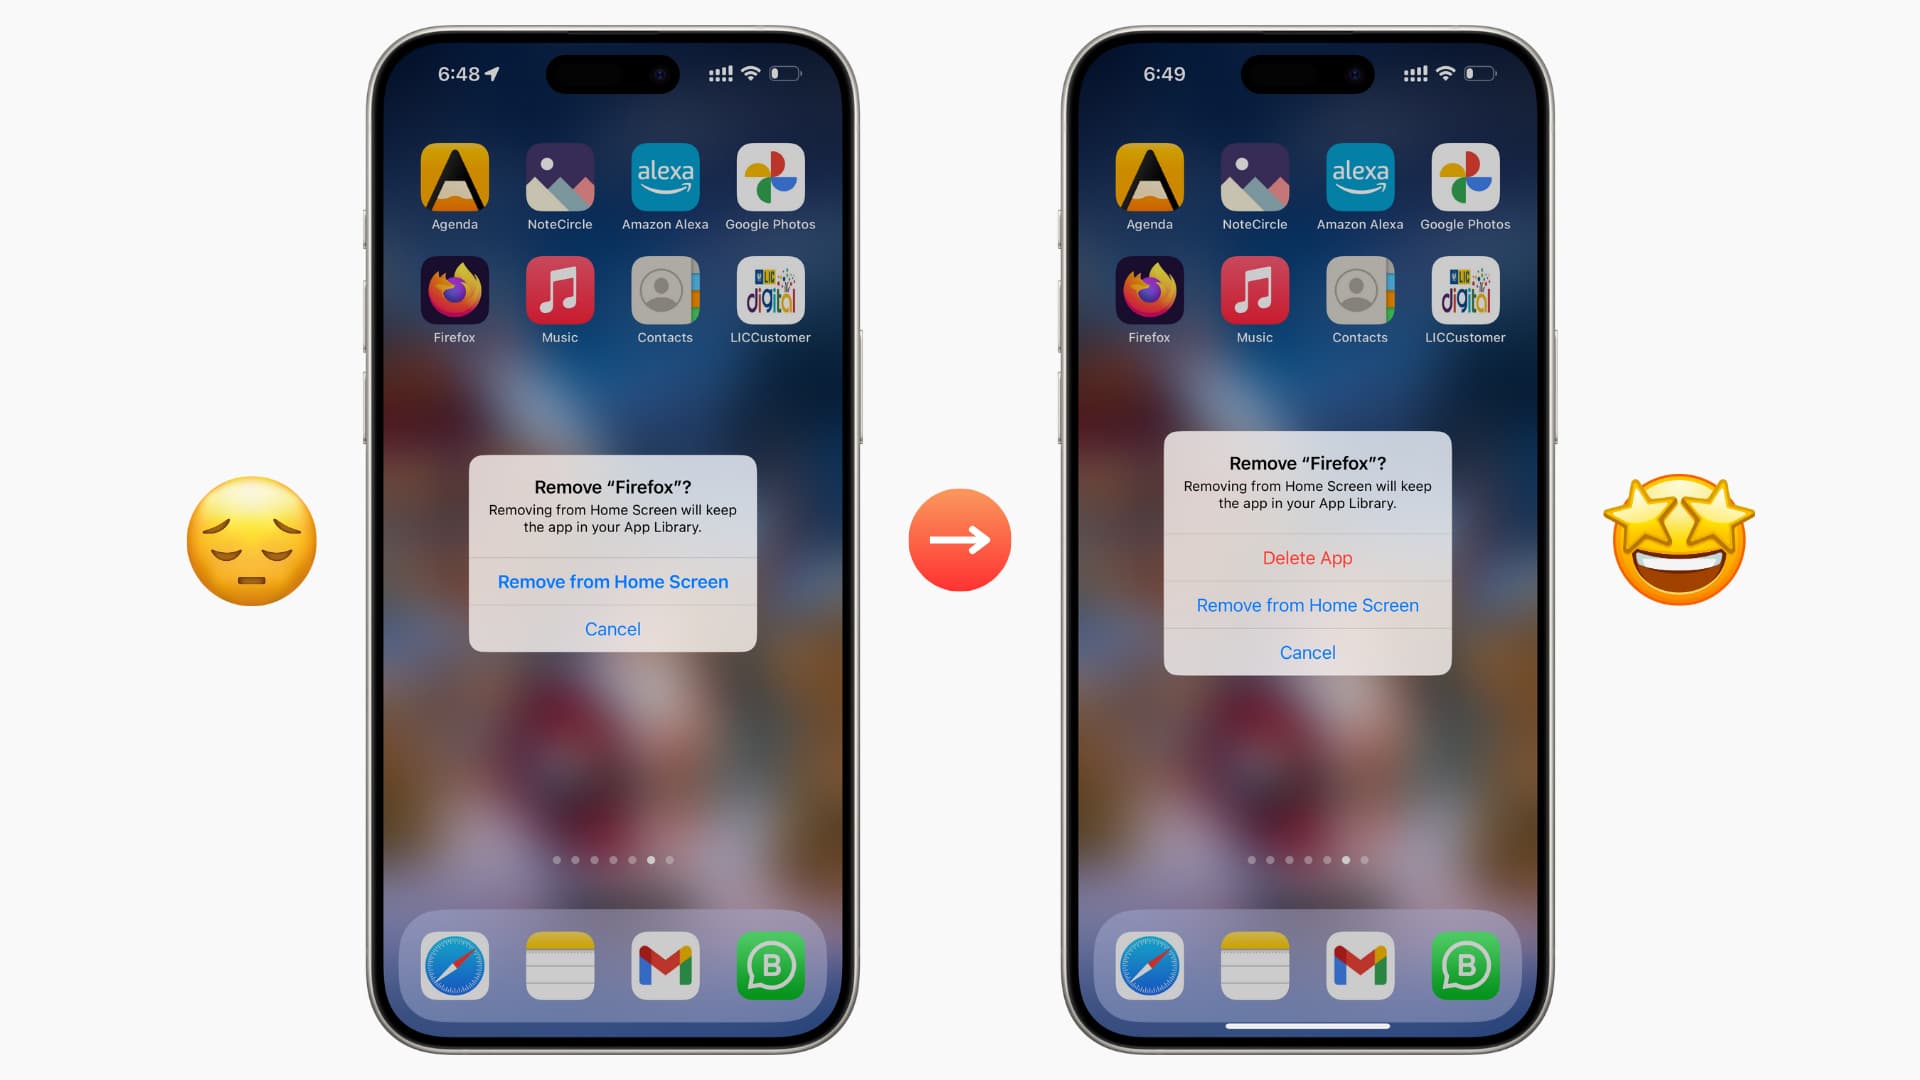 Two iPhone mockups with one missing the Delete App option and the other showing it